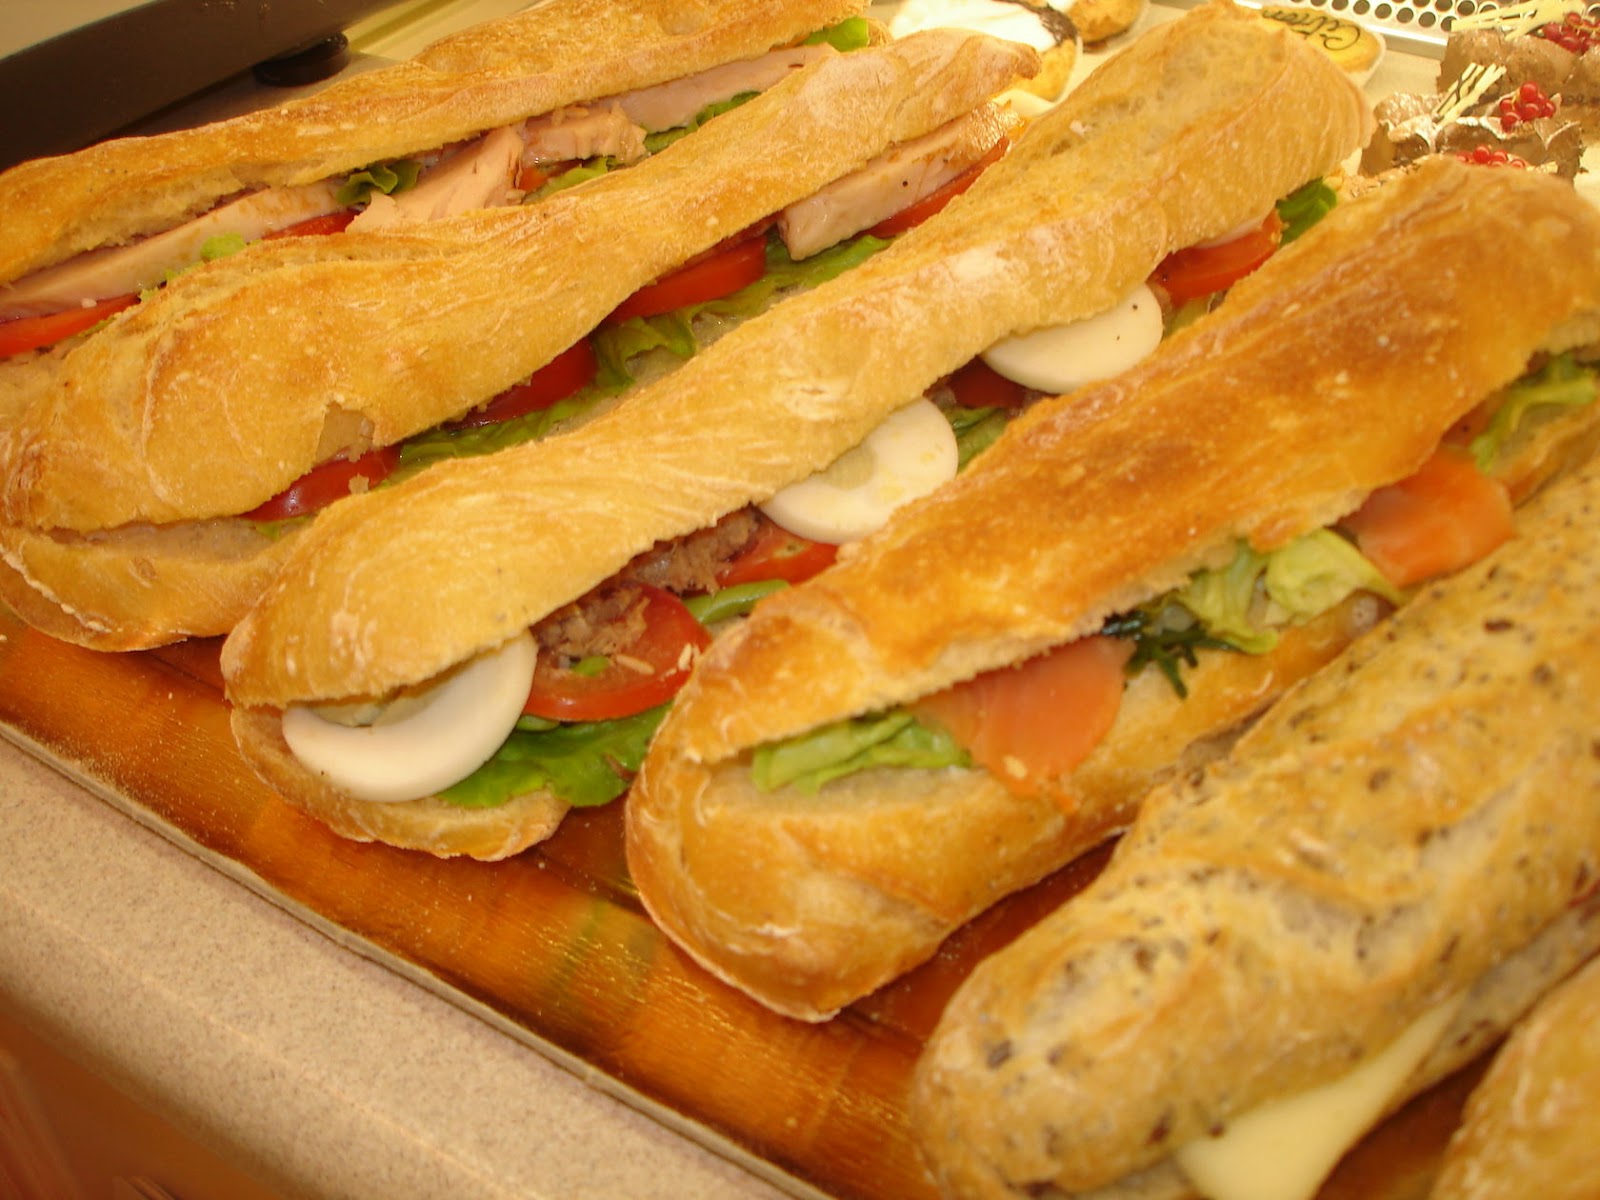 baguette france sandwiches french munch box famous sandwich why so baguettes put way lunch